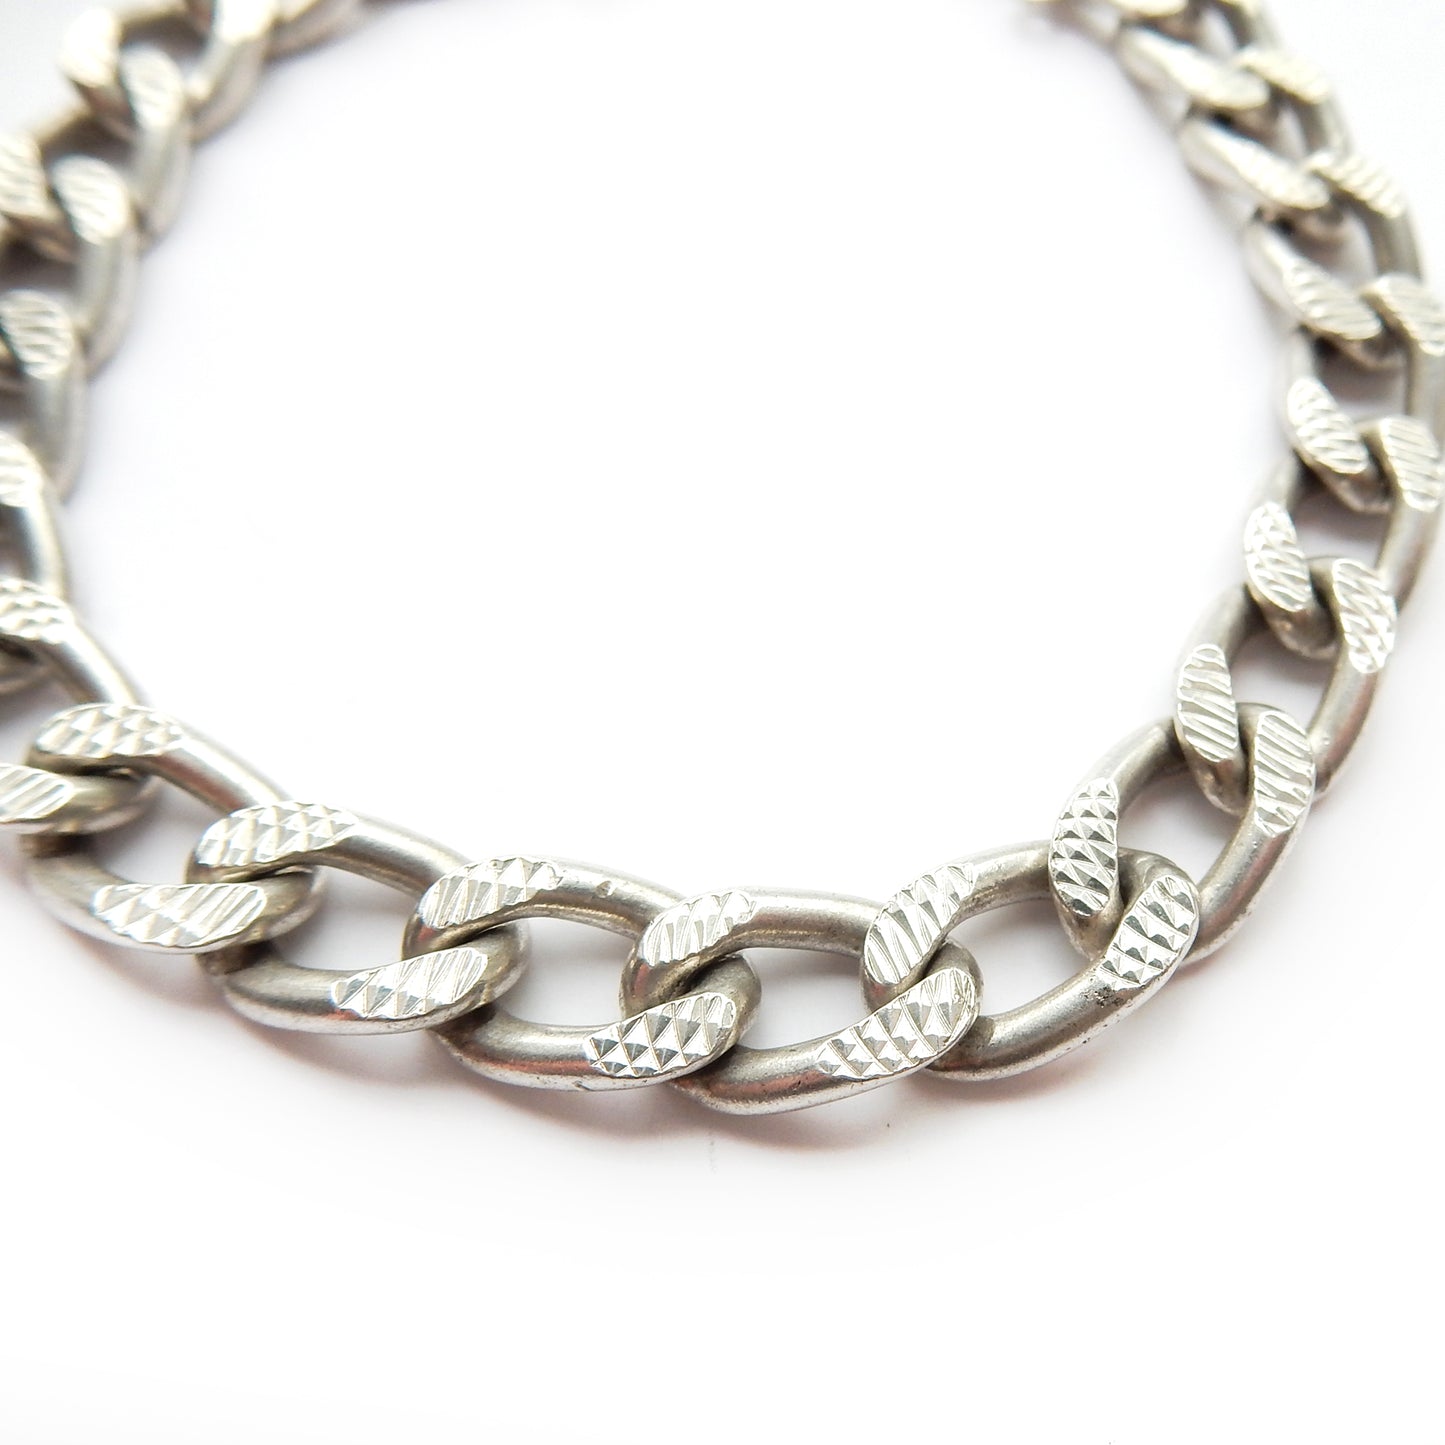 Chunky Vintage Solid Silver Curb Link Bracelet with Dog Clip